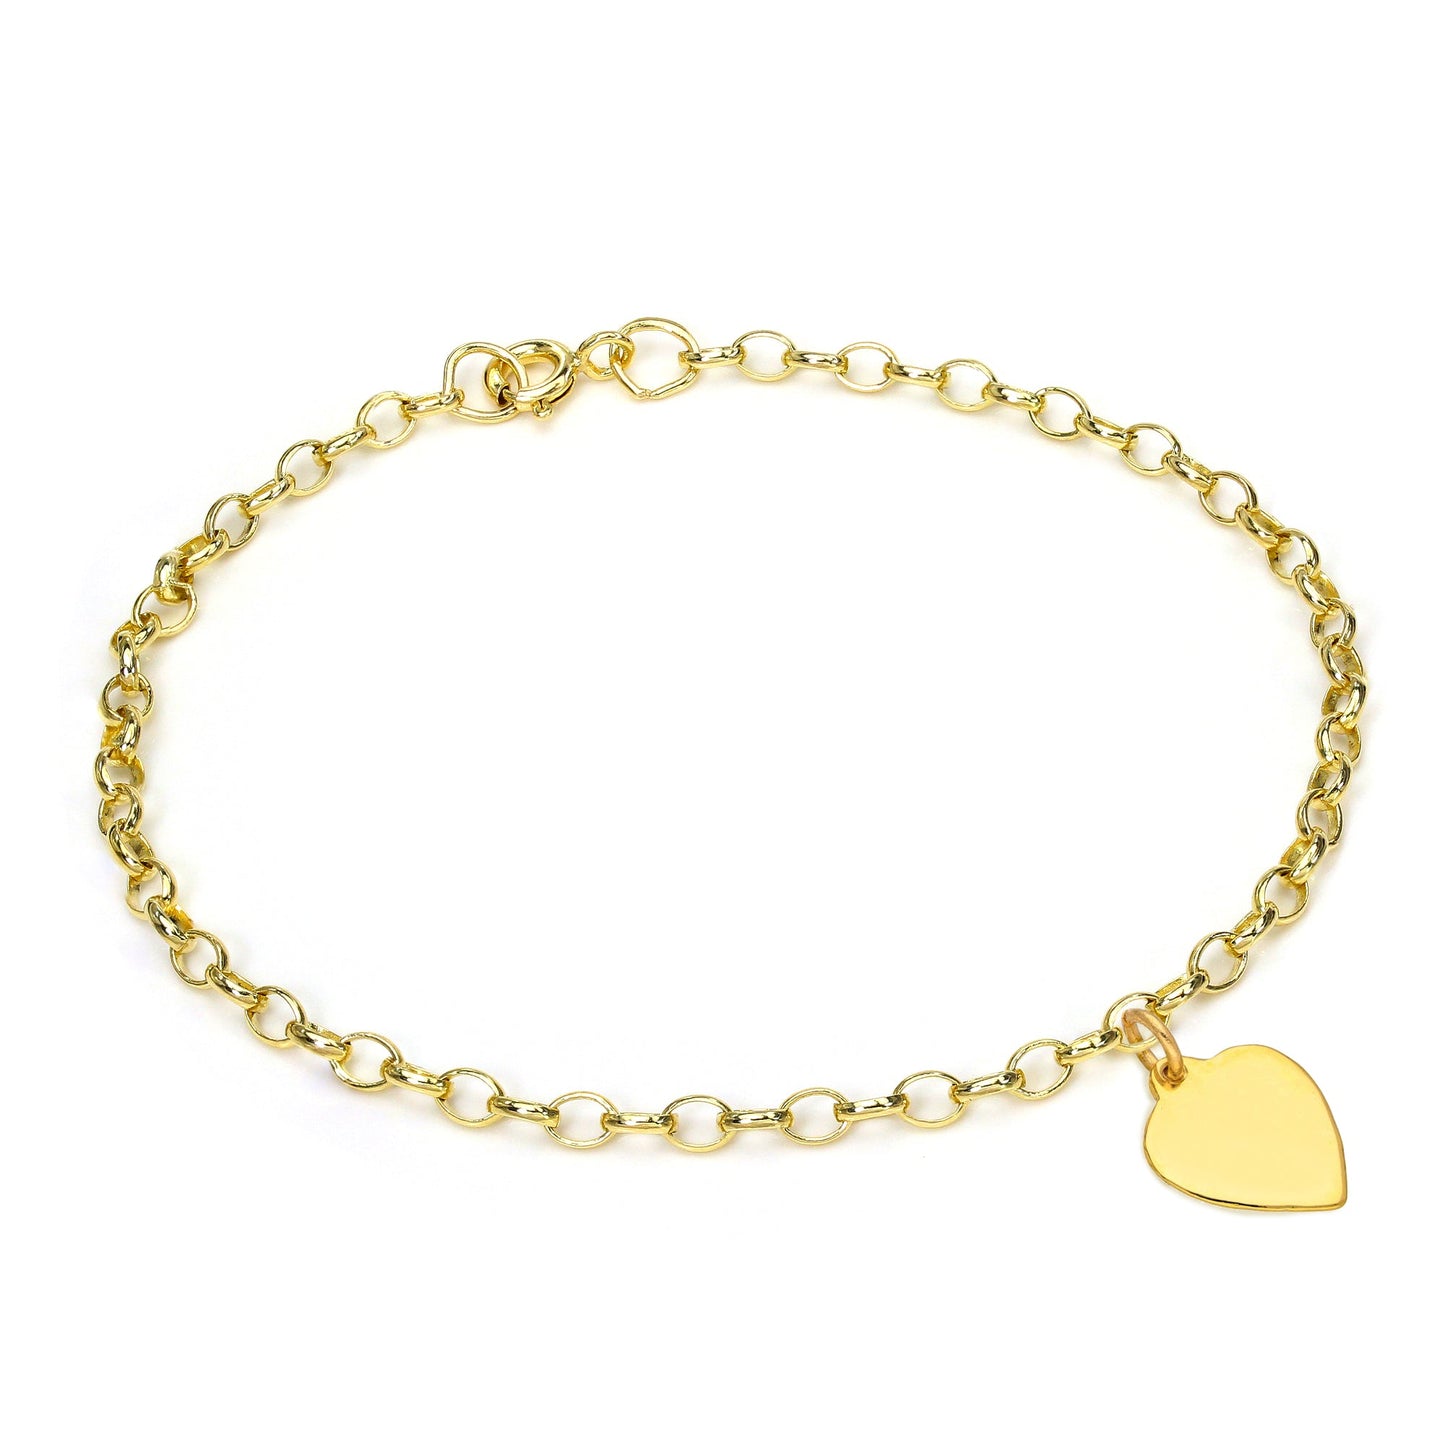 9ct Gold 7 Inch Starter Charm Bracelet with Engravable Heart